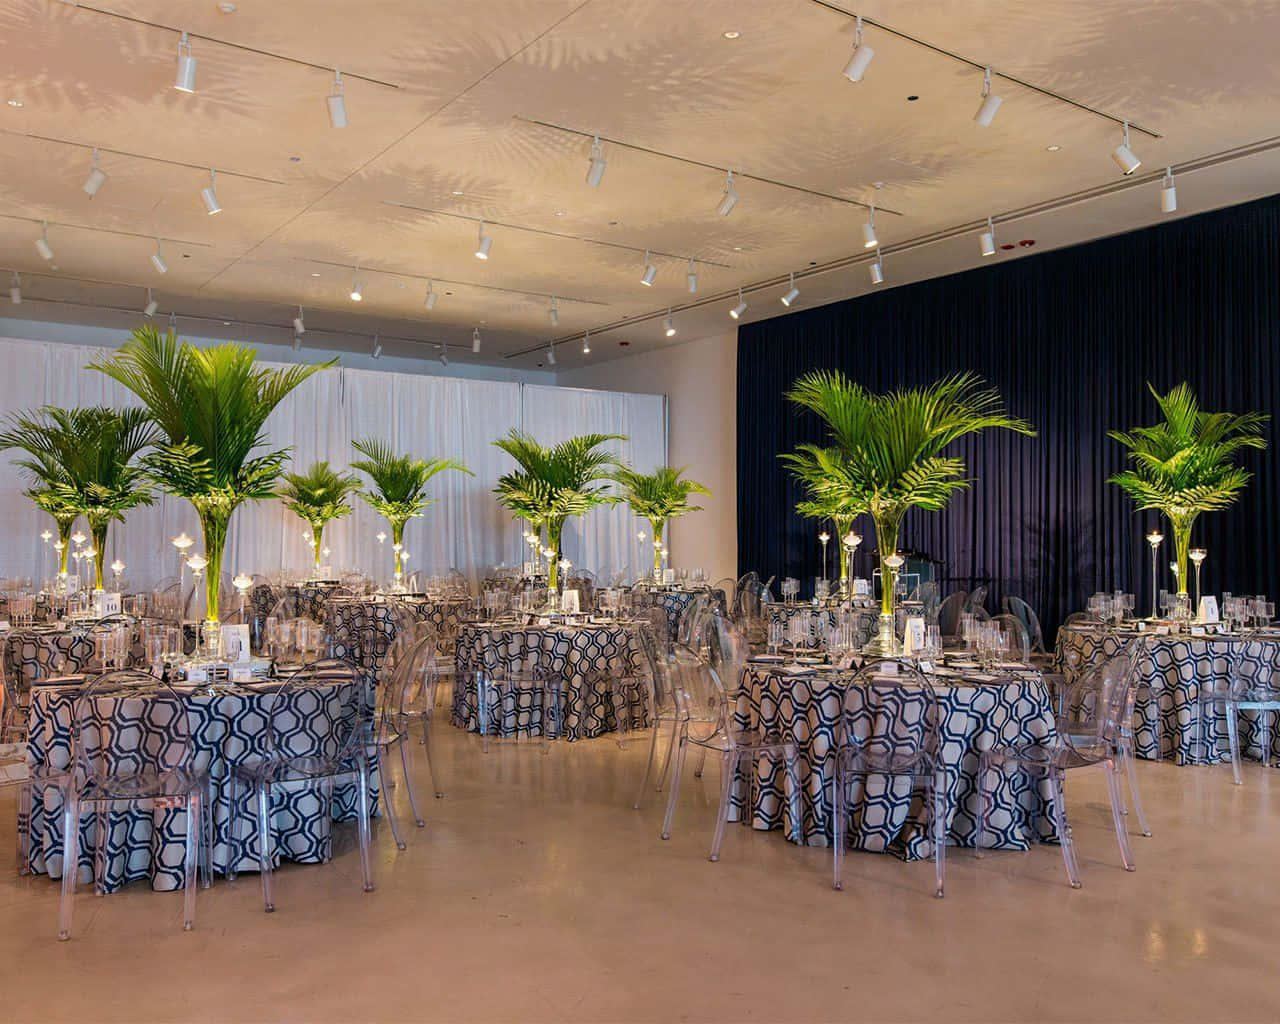 Start the celebration with a memorable corporate event Wallpaper